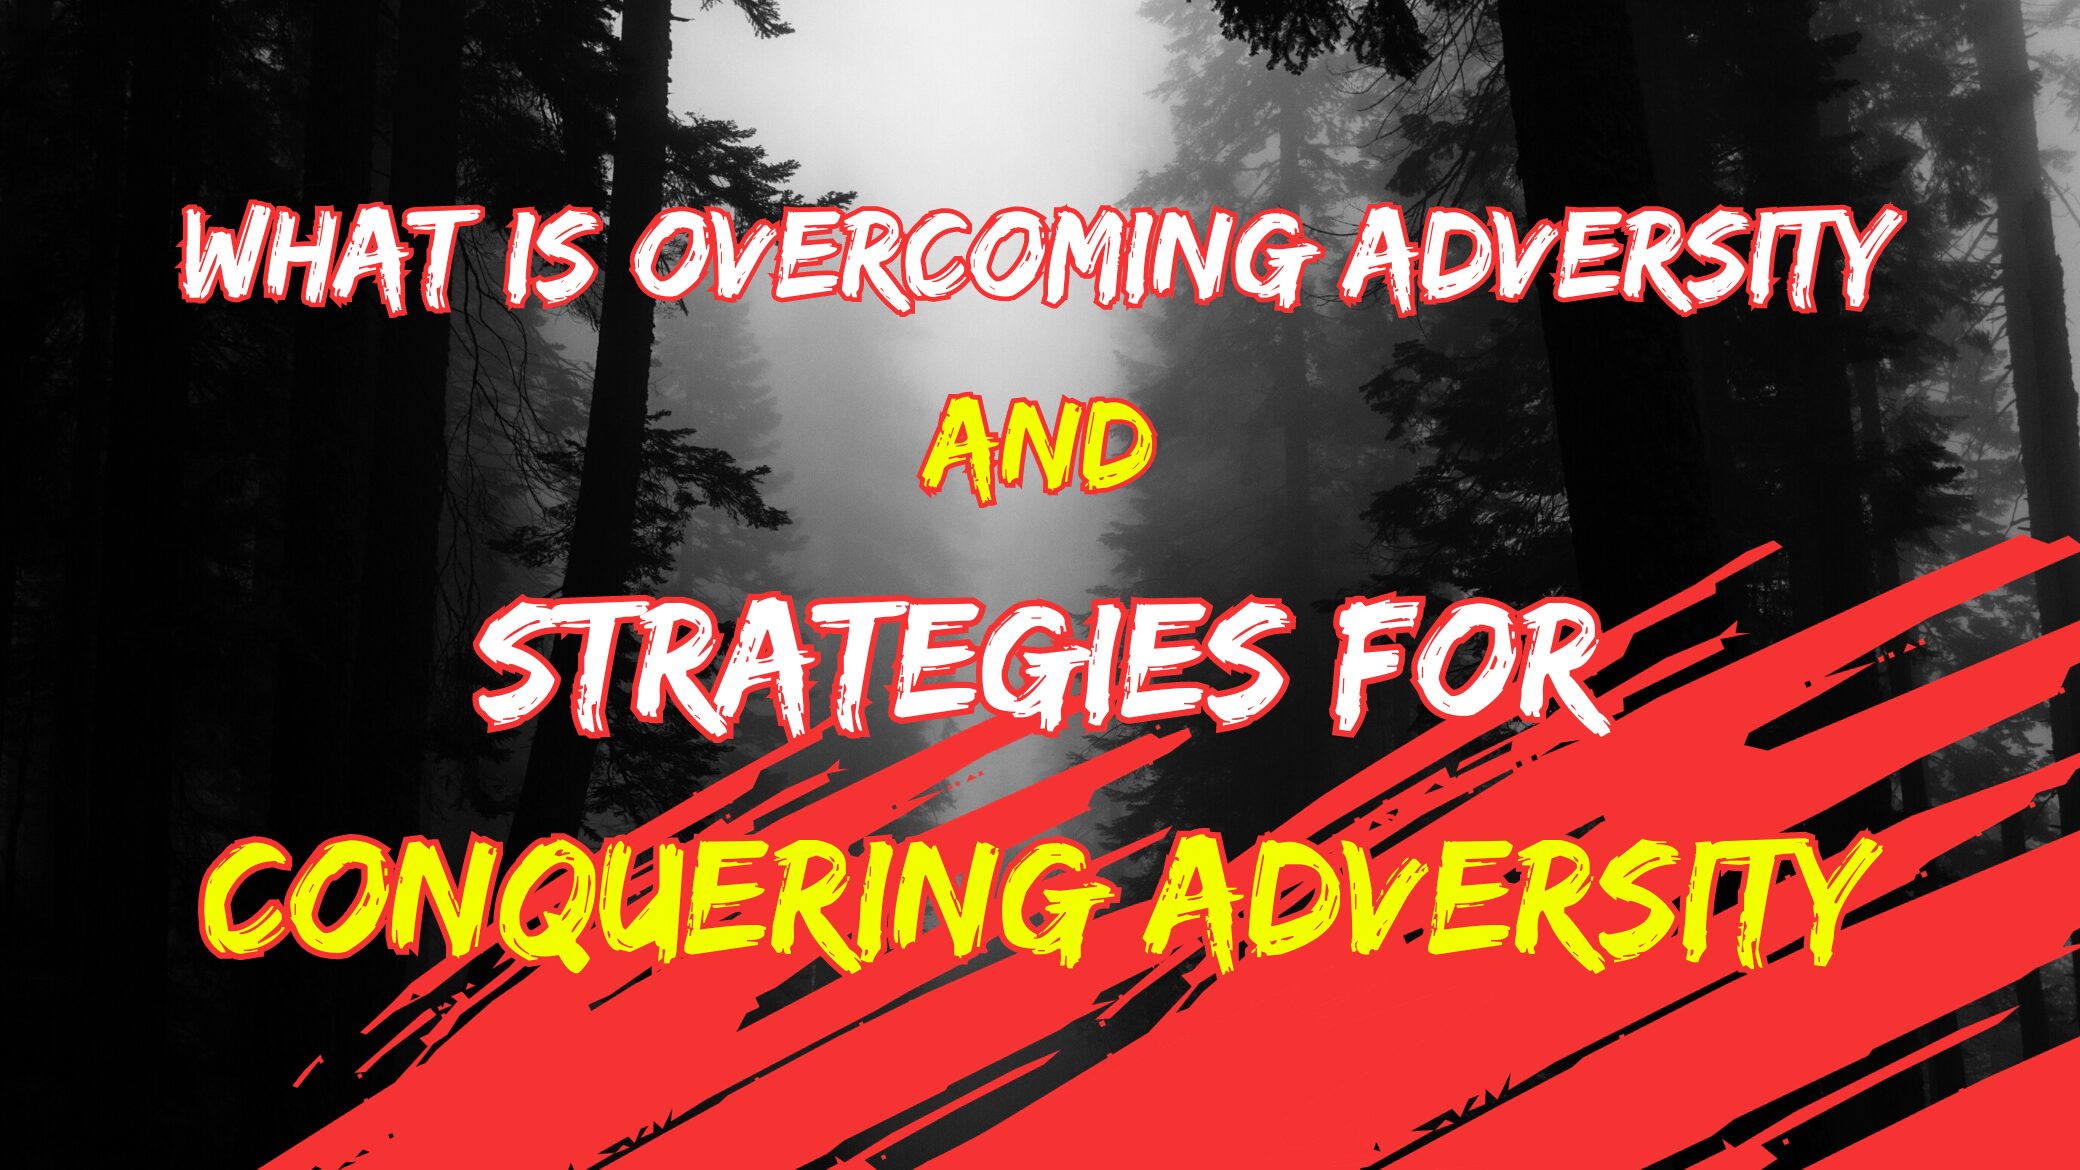 Strategies for conquering adversity